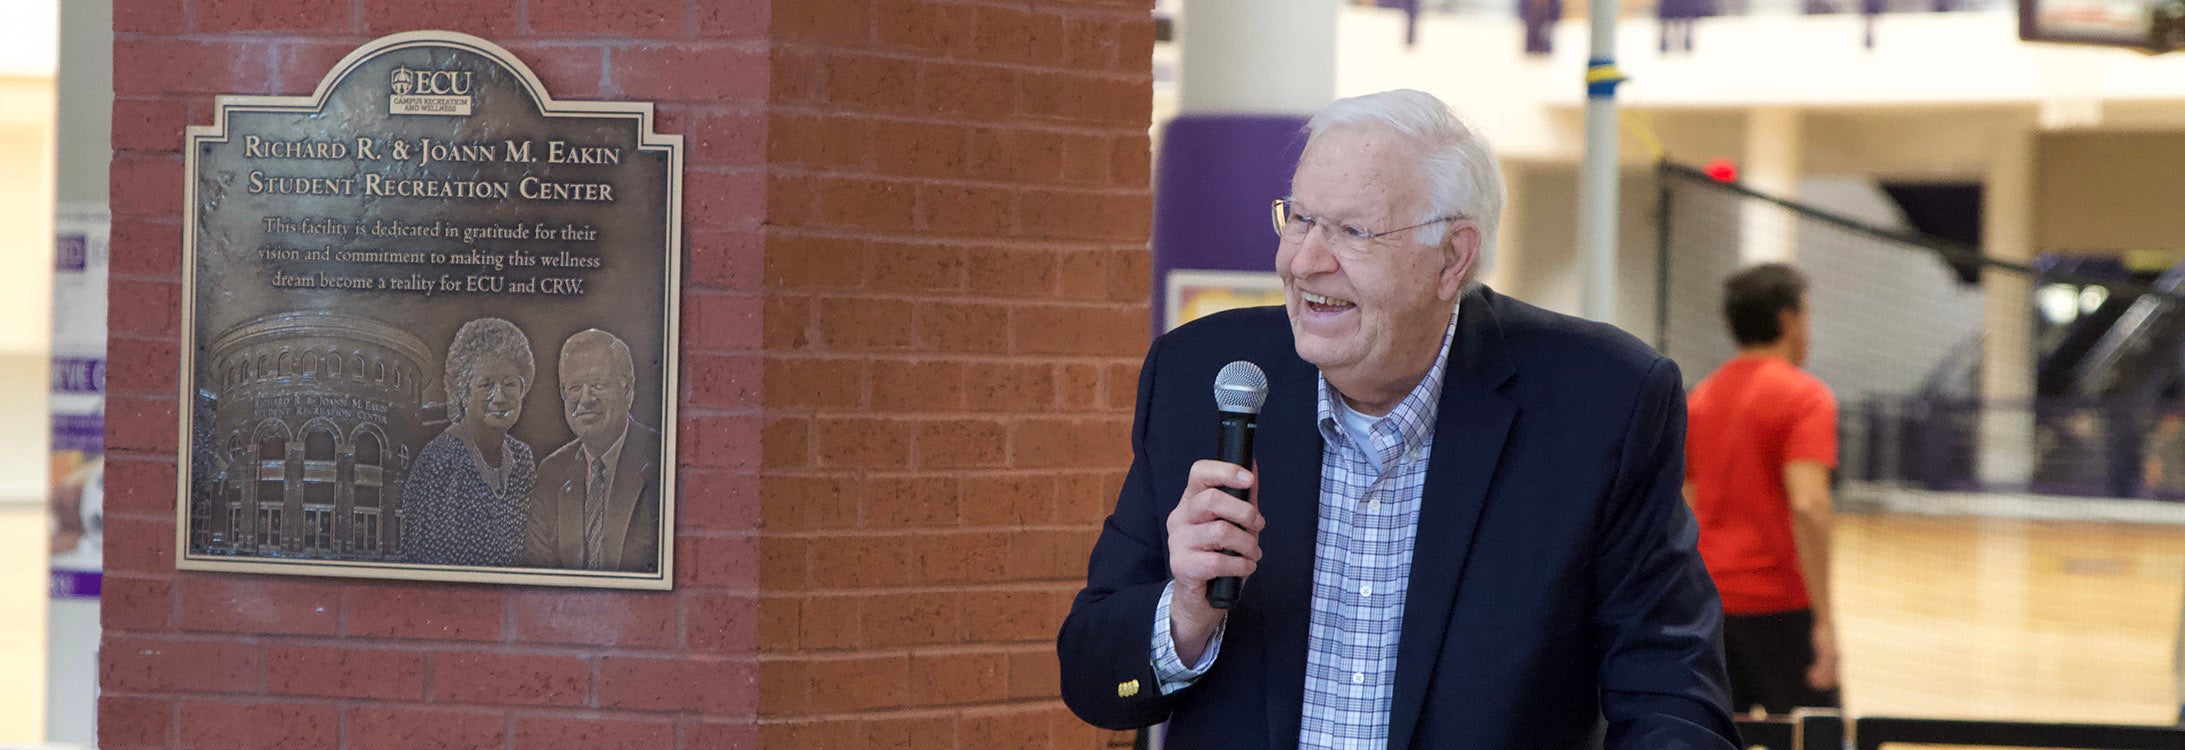 Former Chancellor Dr. Dick Eakin speaks during the dedication where a plaque was unveiled at the Richard R. and JoAnn M. Eakin Student Recreation Center at East Carolina University.